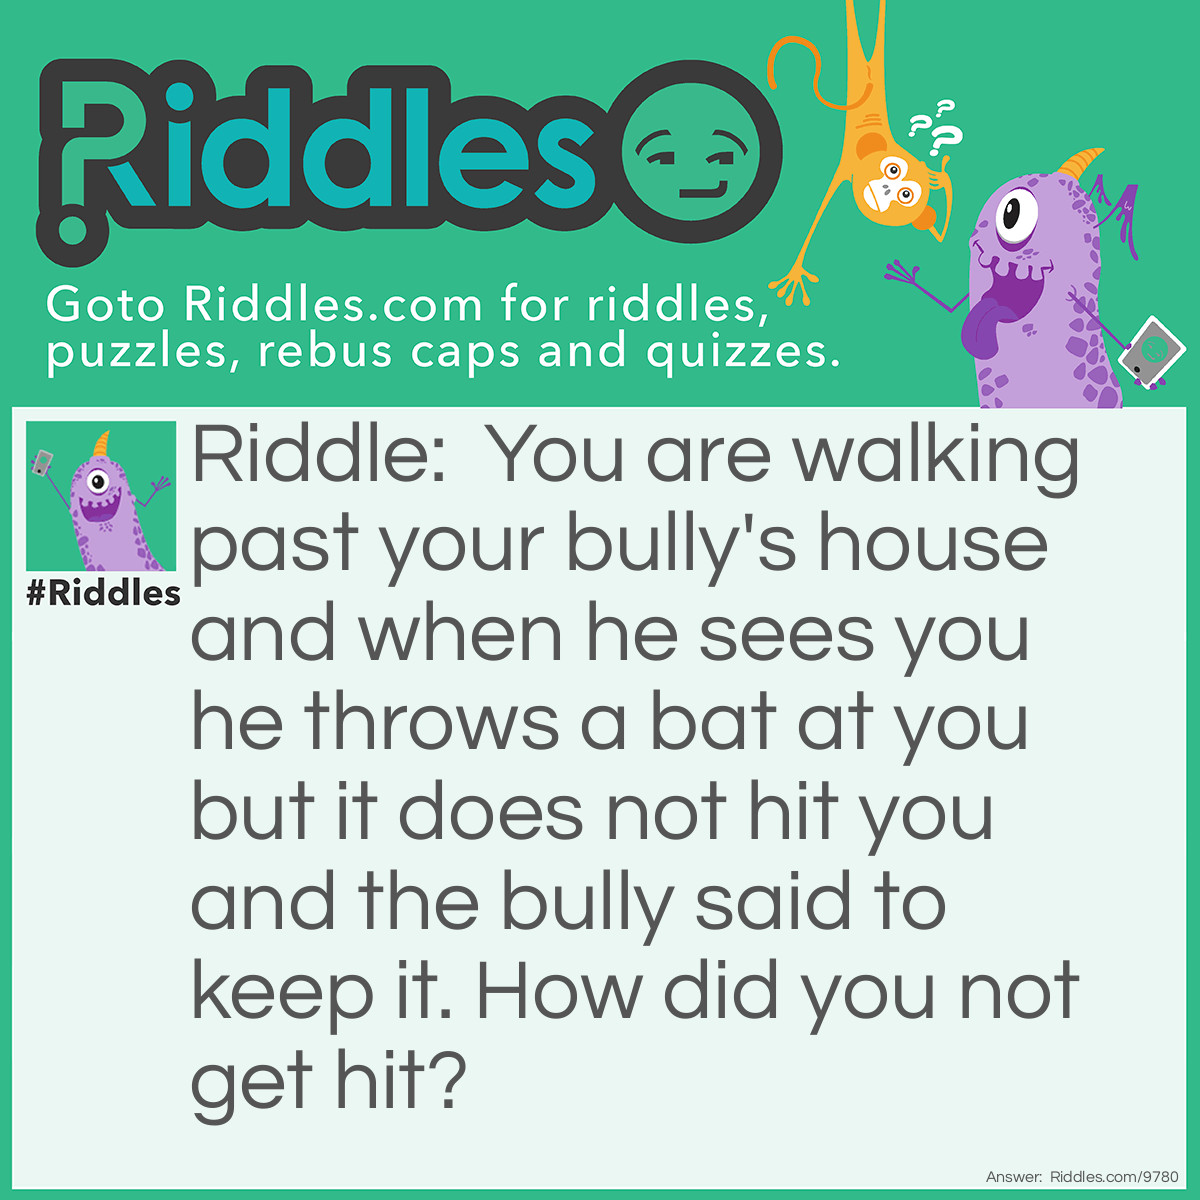 Riddle: You are walking past your bully's house and when he sees you he throws a bat at you but it does not hit you and the bully said to keep it. How did you not get hit? Answer: It was a pet bat.